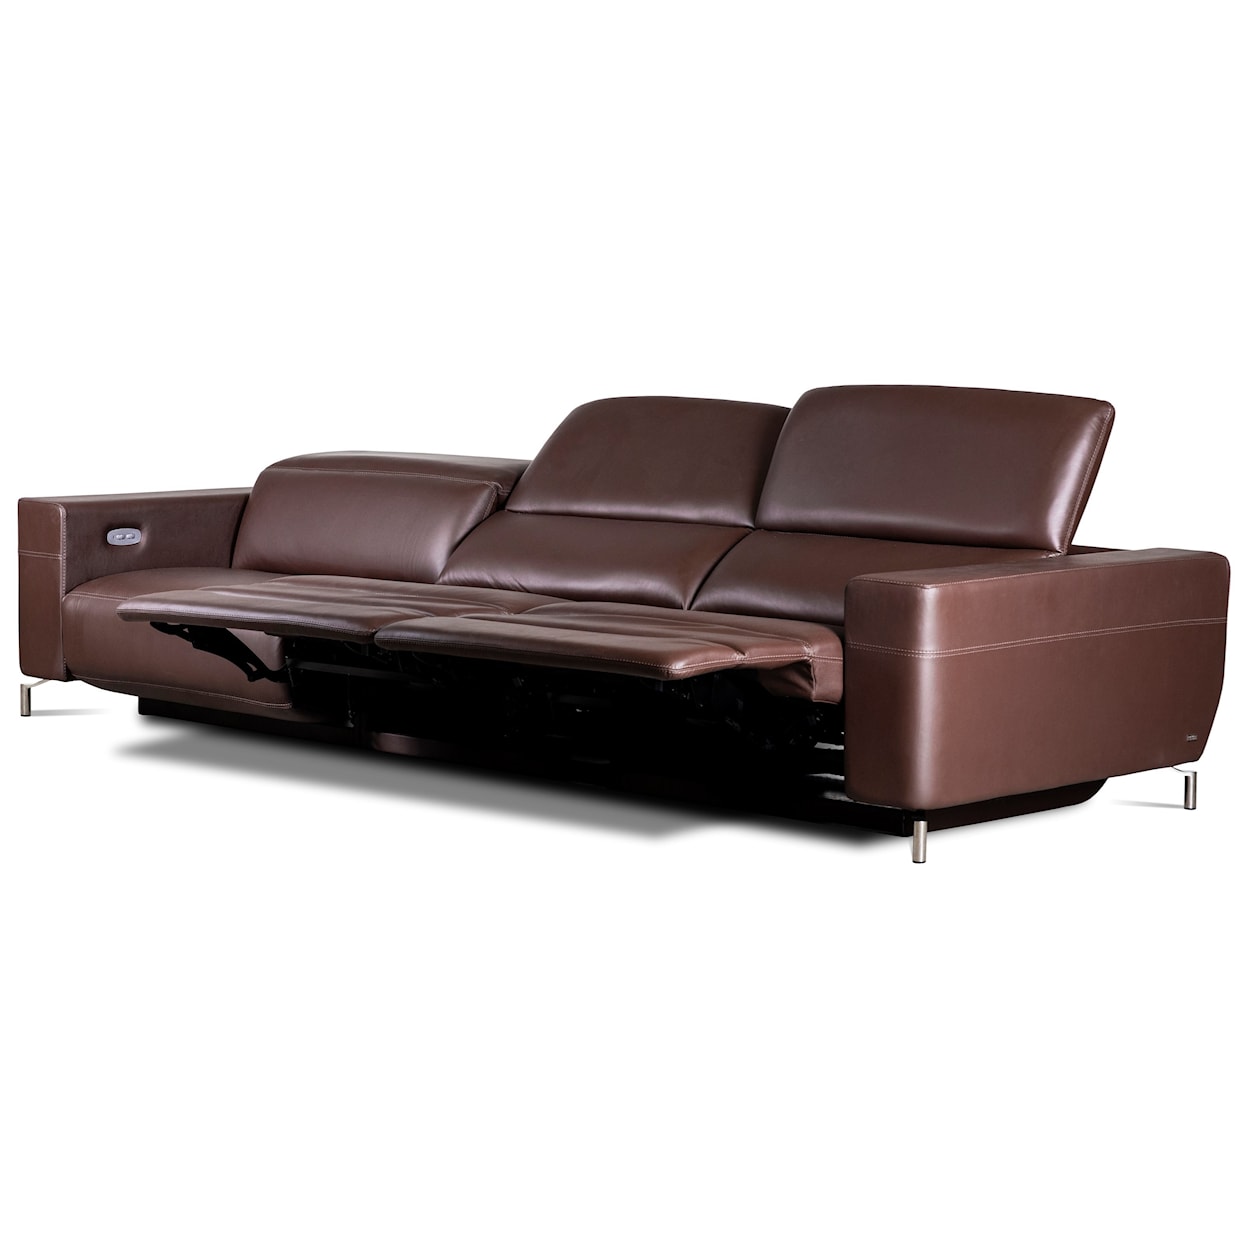 American Leather Monza 3-Seat Reclining Sofa